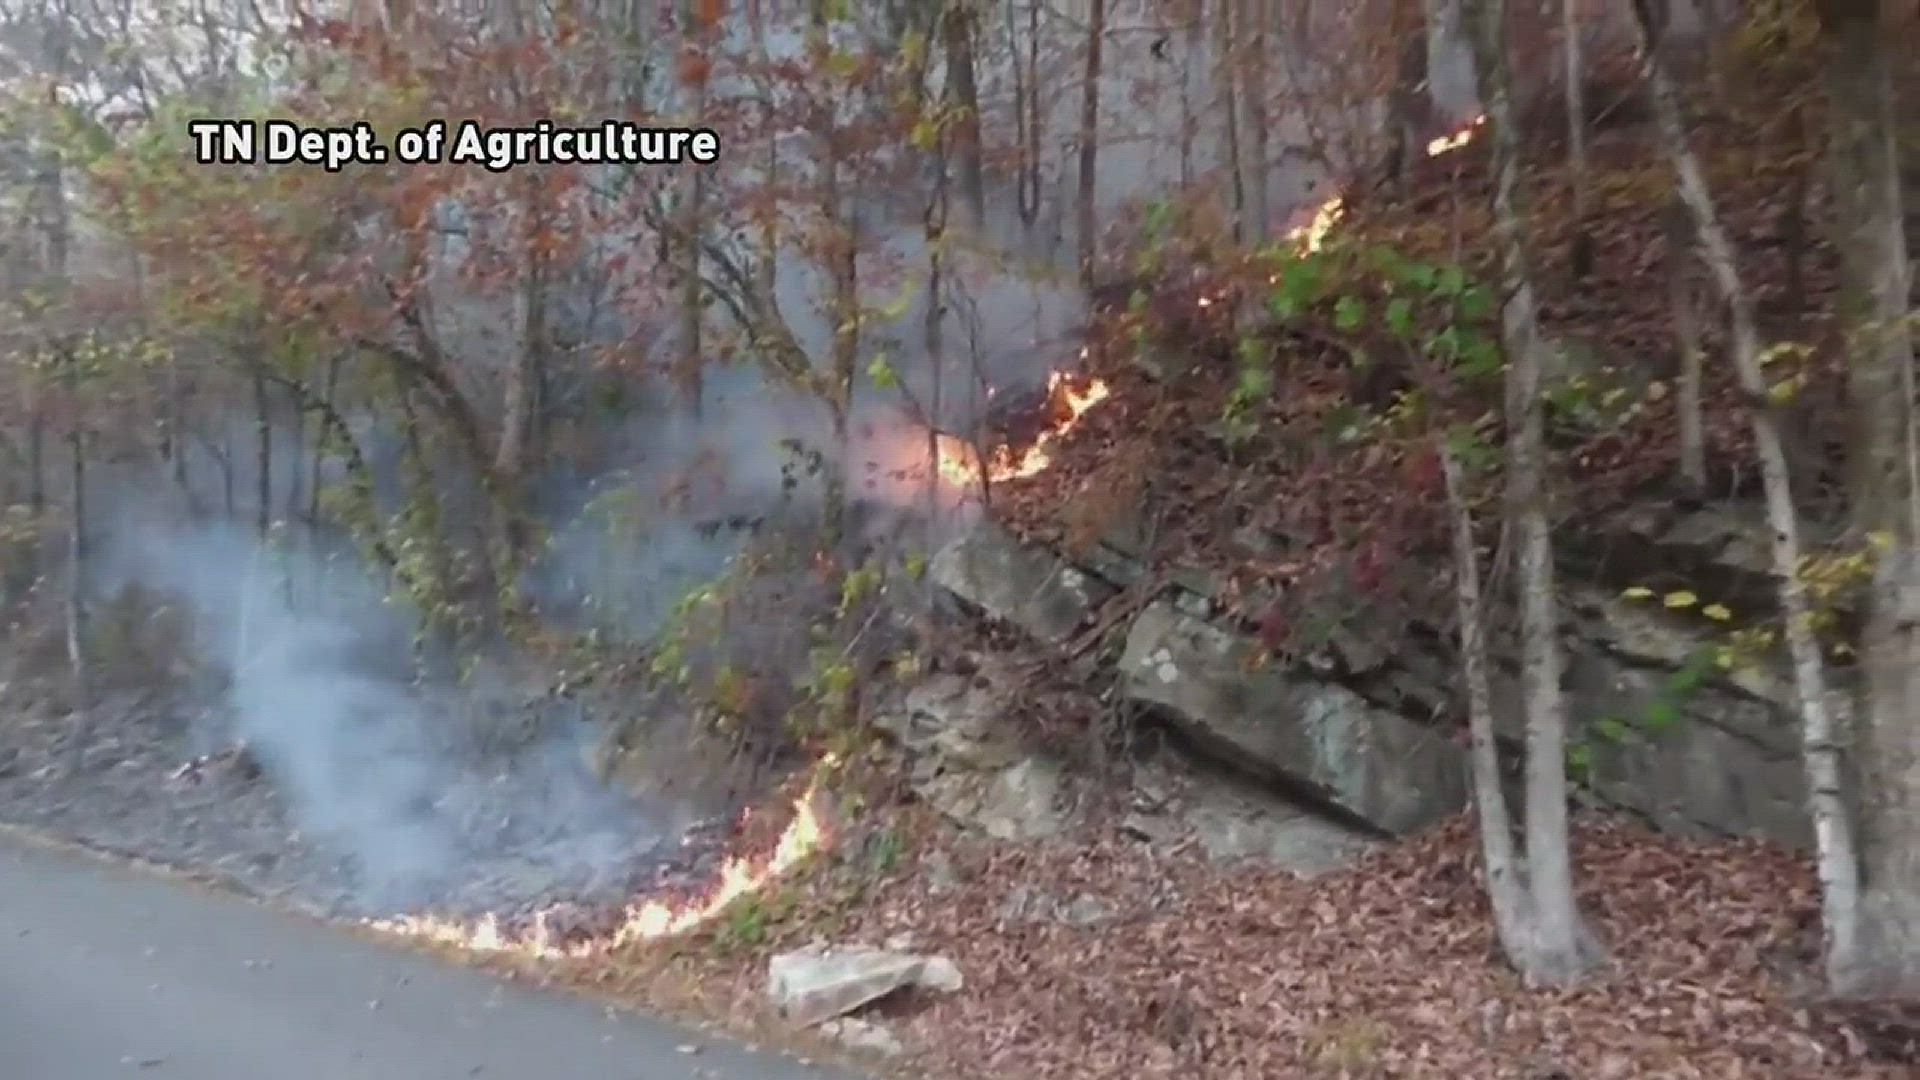 Video from TN Department of Agriculture from East Miller Cove fire in Blount County showing dangers of wildfire such as loose, rolling rock and trees snags against power lines. (Nov. 18, 2016)